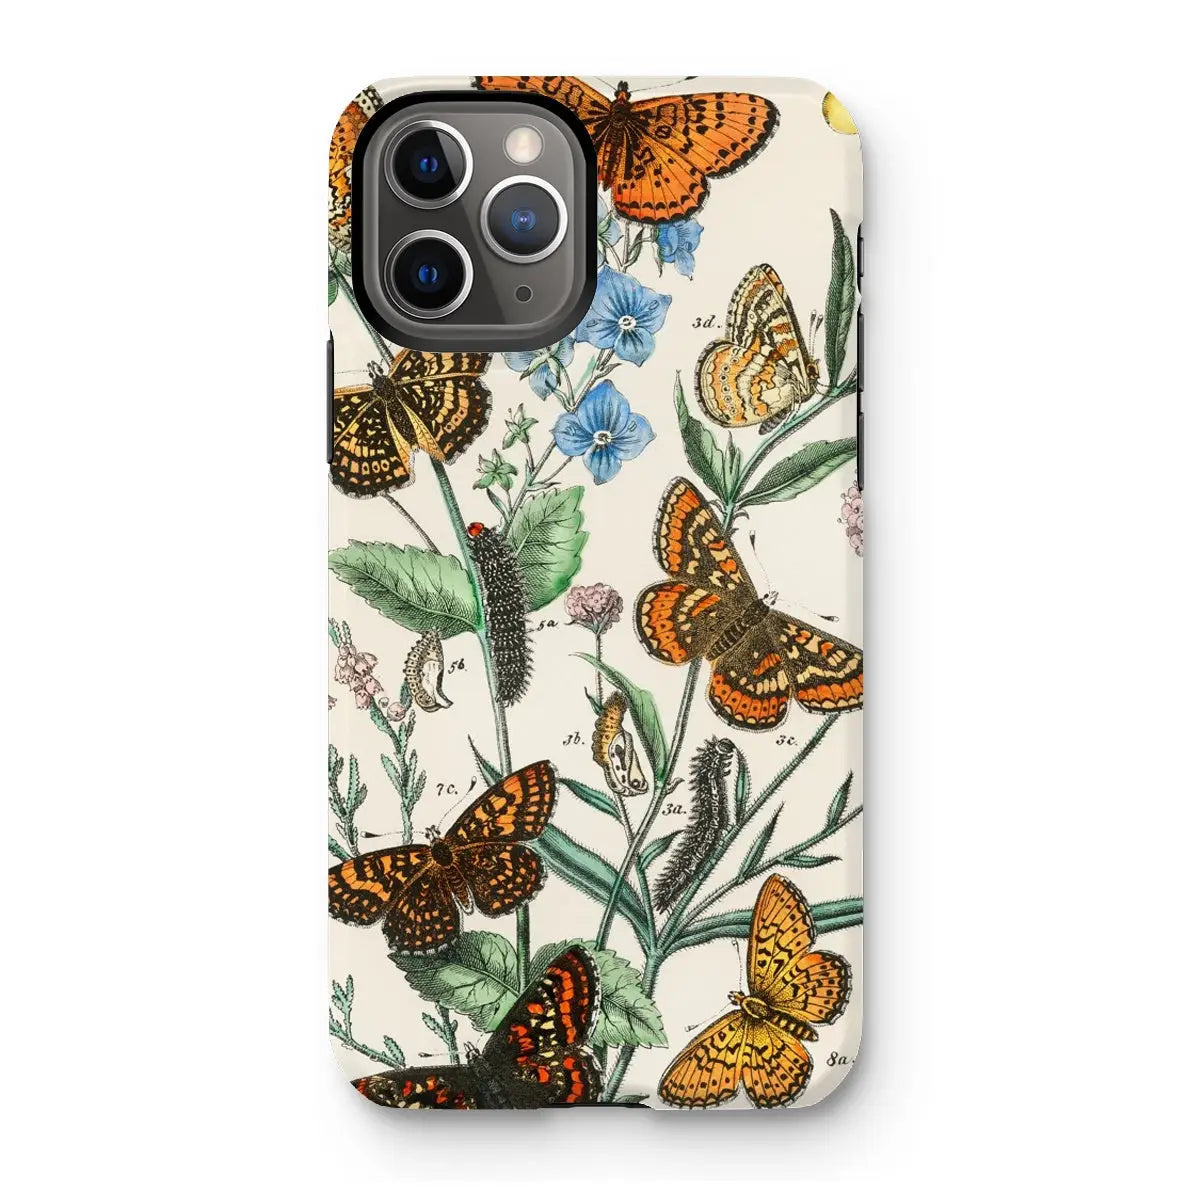 European Butterflies And Moths 2 Art Phone Case - William Forsell Kirby - Iphone 11 Pro / Matte - Mobile Phone Cases